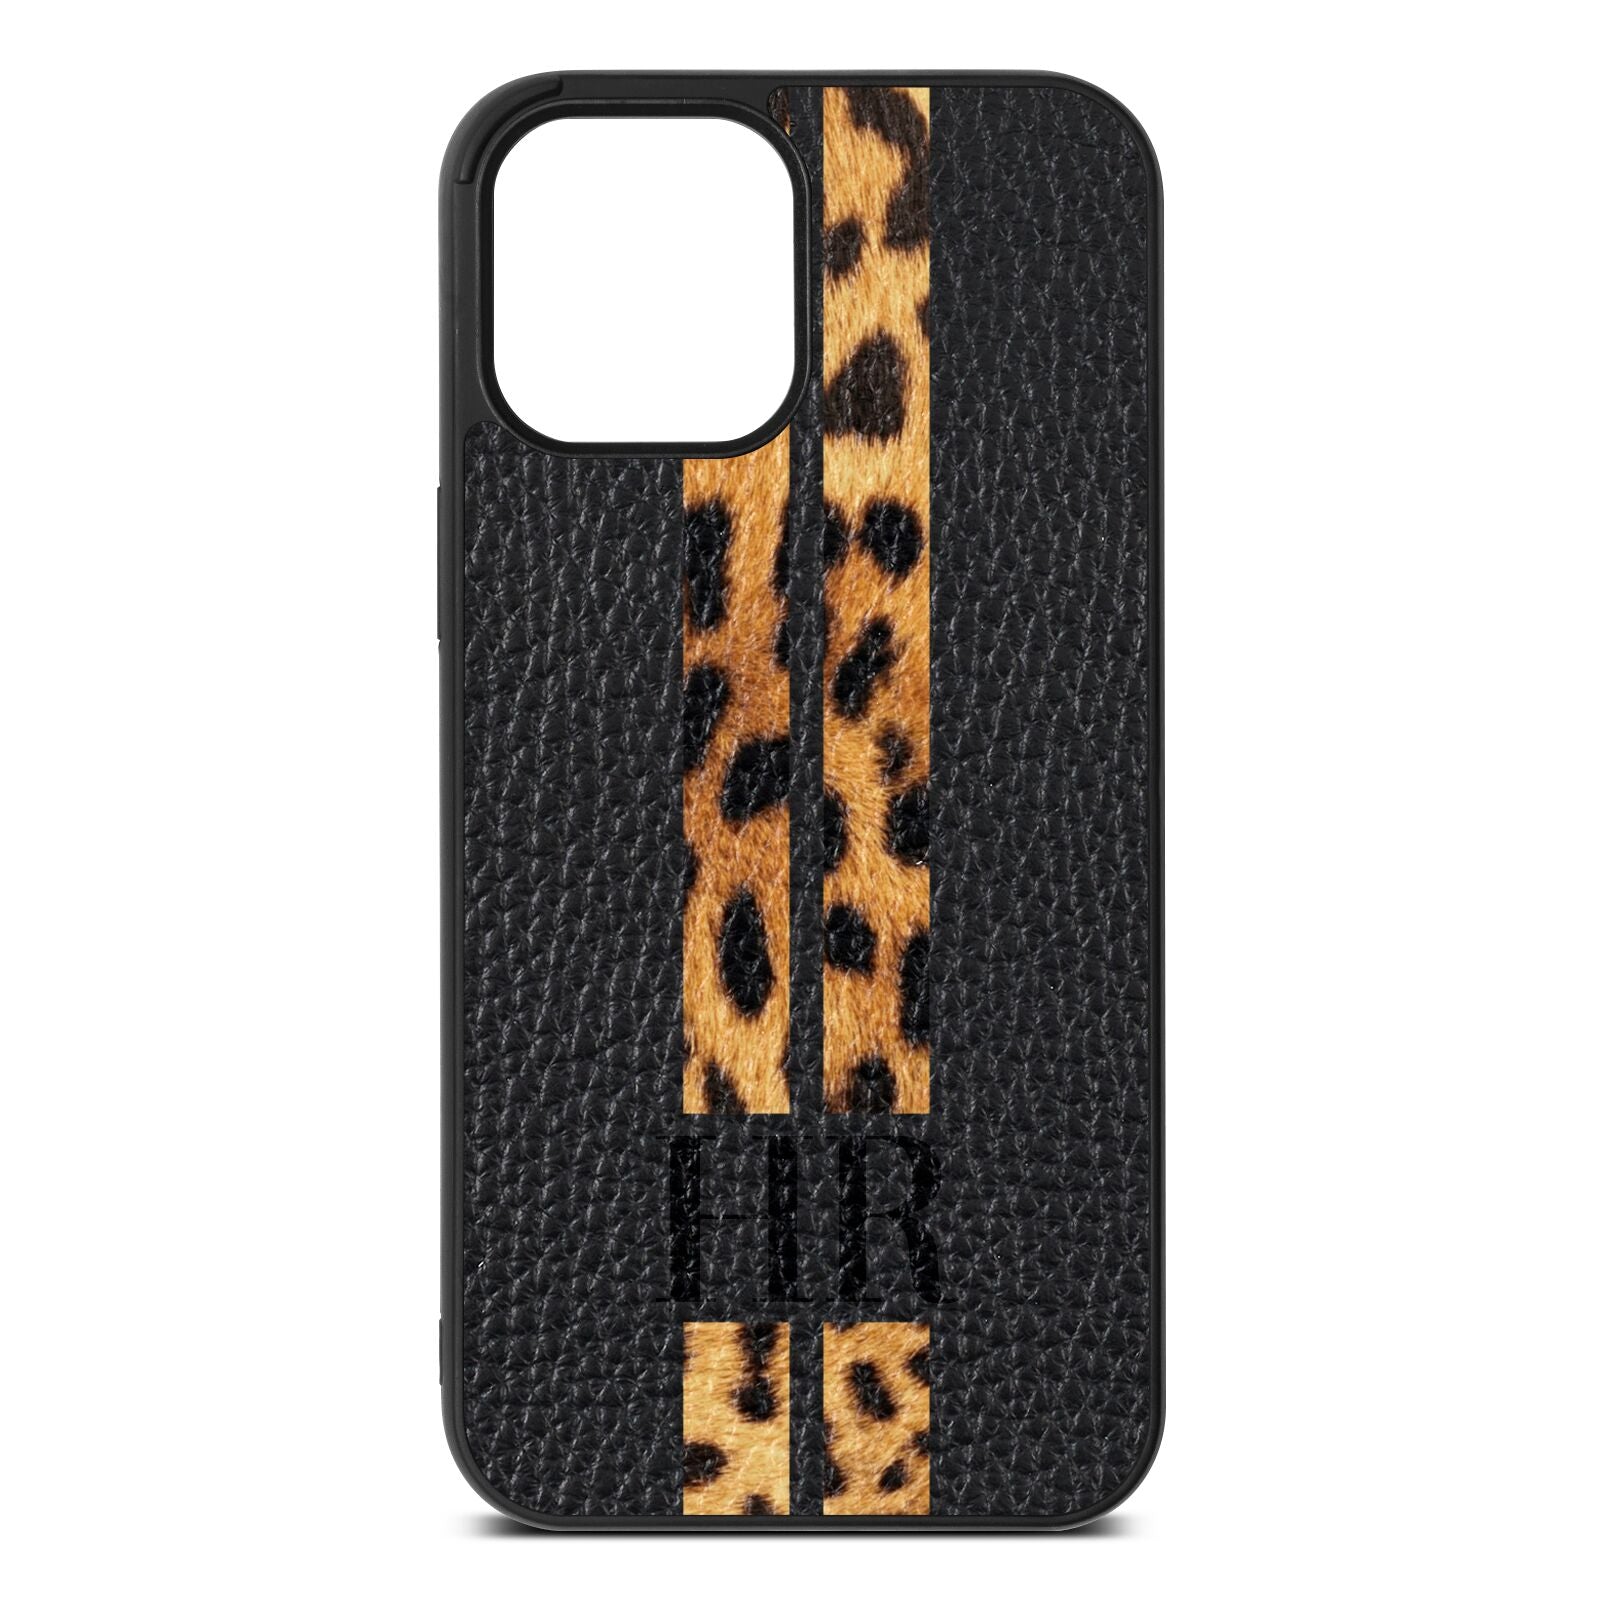 Initialled Leopard Print Stripes Black Pebble Leather iPhone 12 Pro Max Case